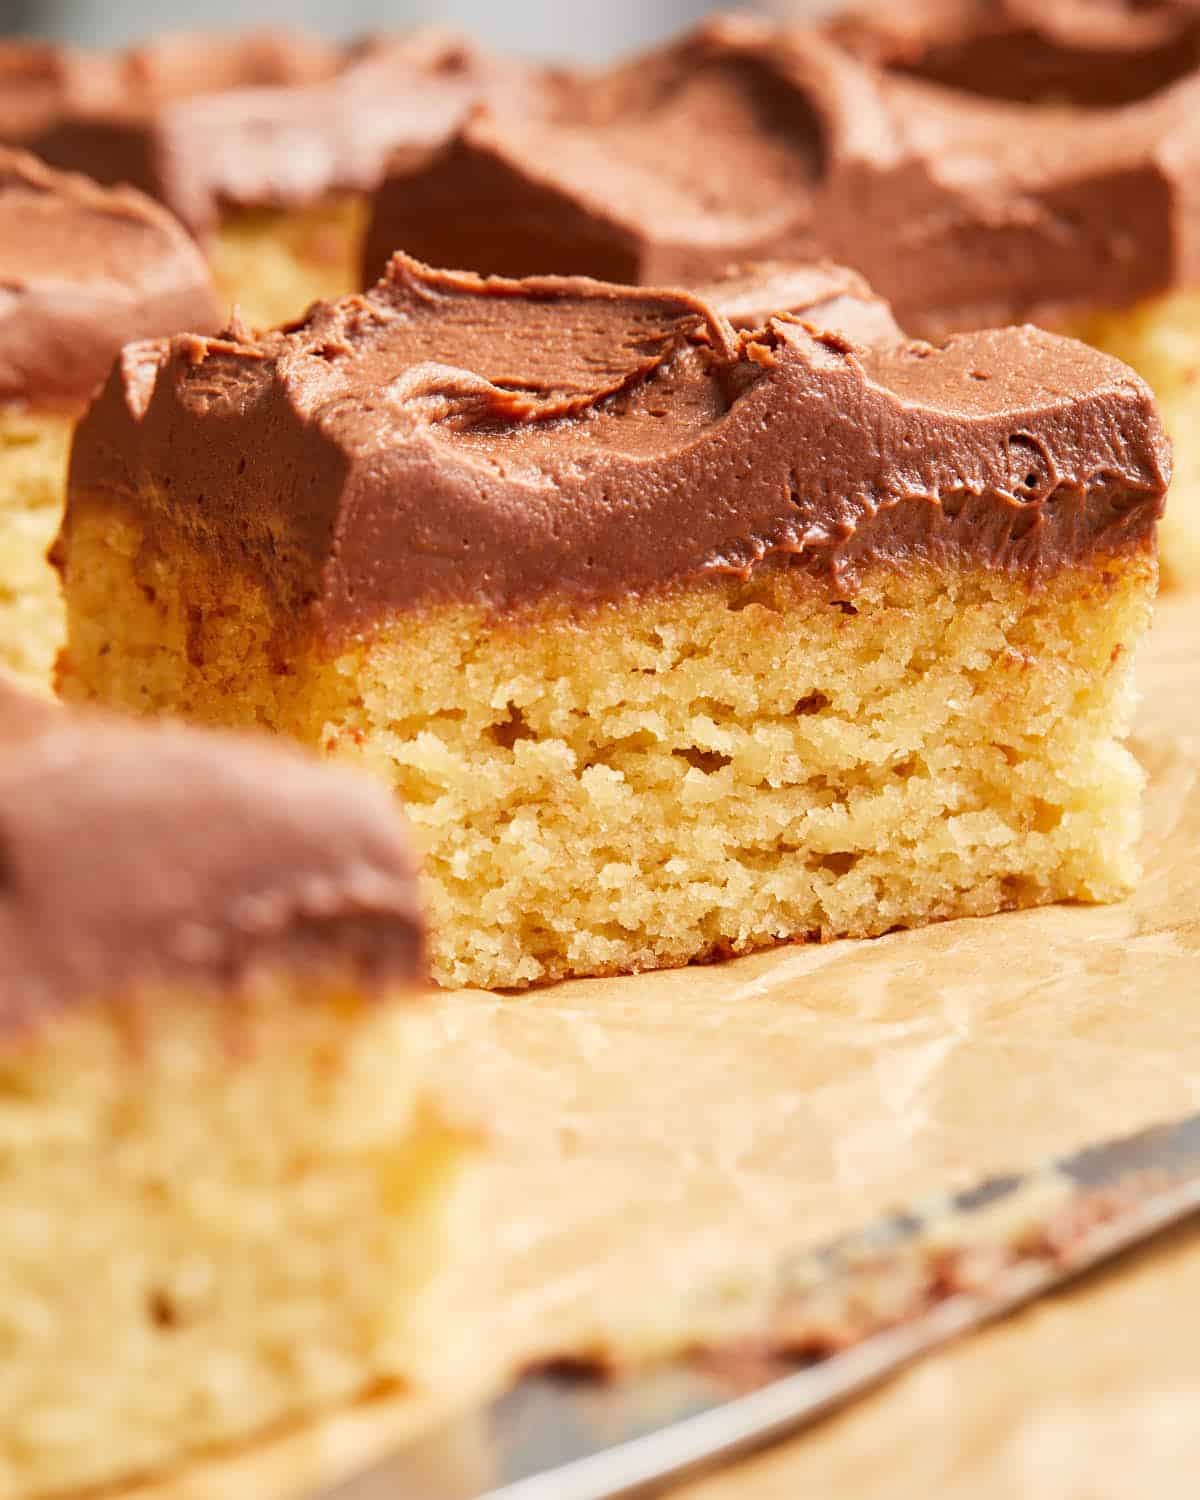 Up close view of a piece of banana cake with chocolate frosting on top.